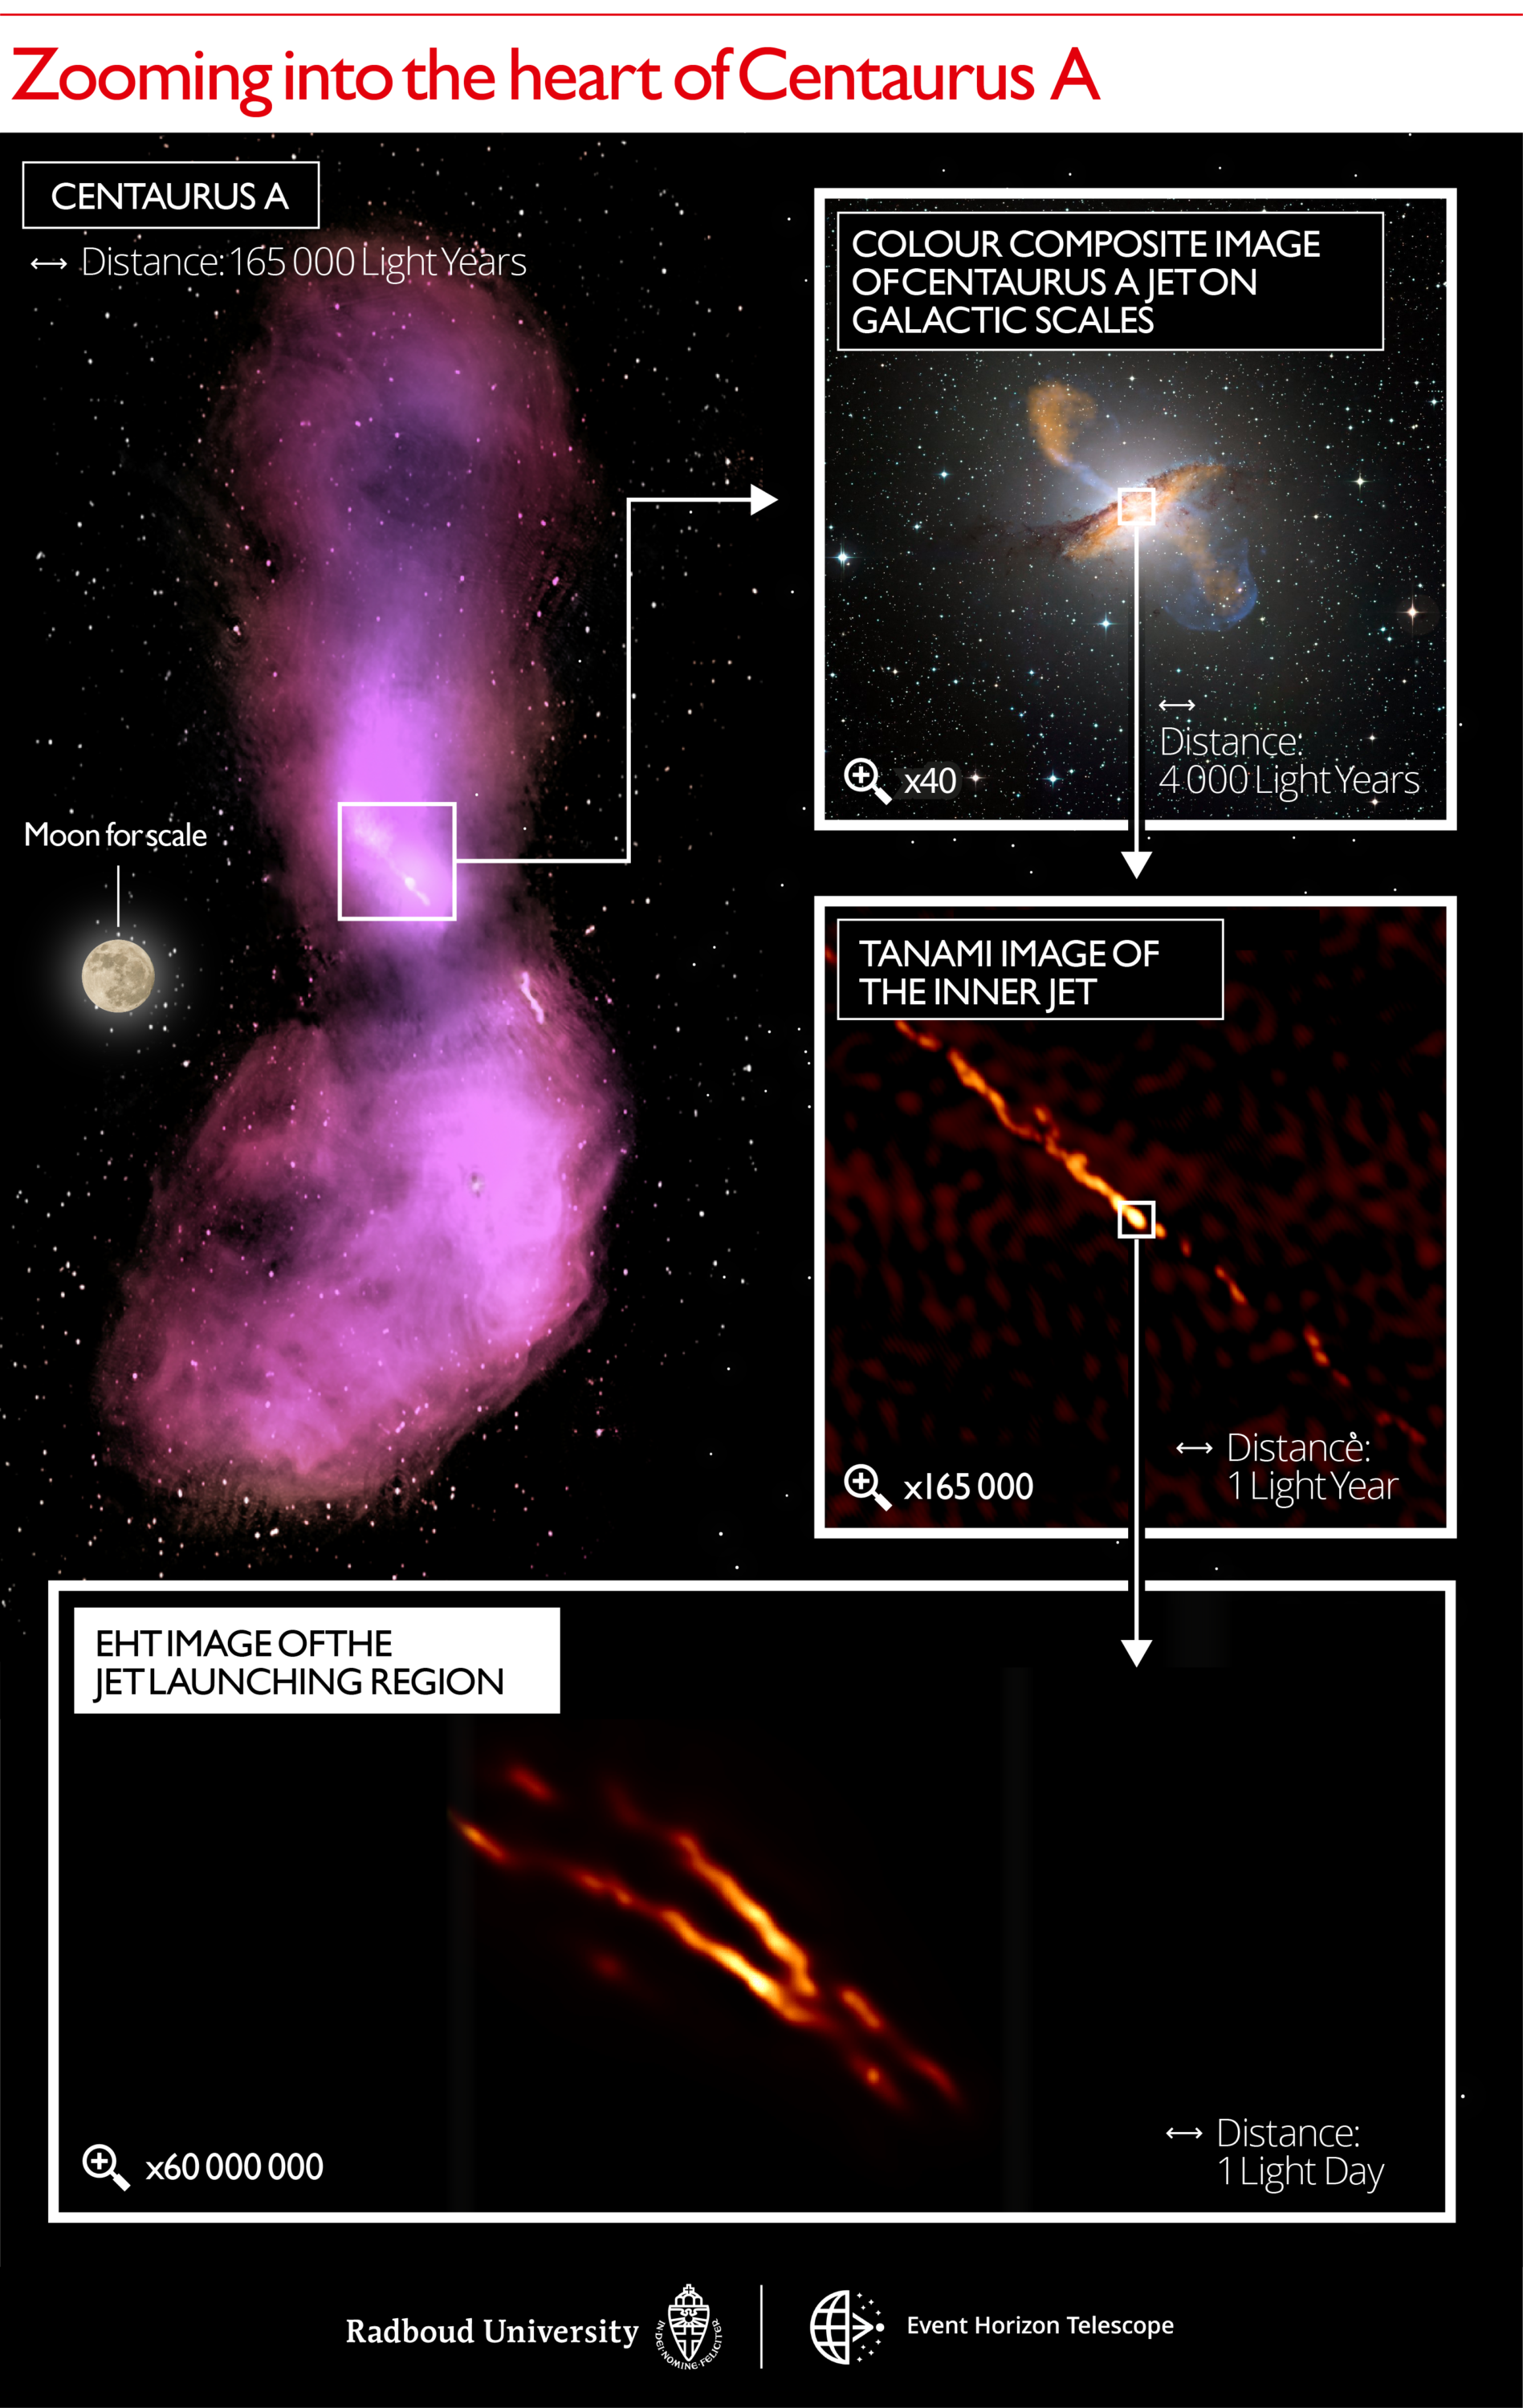 Distance scales uncovered in the Centaurus A jet. The top left image shows how the jet disperses into gas clouds that emit radio waves, captured by the ATCA and Parkes observatories. The top right panel displays a color composite image, with a 40x zoom compared to the first panel to match the size of the galaxy itself. Submillimeter emission from the jet and dust in the galaxy measured by the LABOCA/APEX instrument is shown in orange. X-ray emission from the jet measured by the Chandra spacecraft is shown in blue. Visible white light from the stars in the galaxy has been captured by the MPG/ESO 2.2-metre telescope. The next panel below shows a 165000x zoom image of the inner radio jet obtained with the TANAMI telescopes. The bottom panel depicts the new highest resolution image of the jet launching region obtained with the EHT at millimeter wavelengths with a 60000000x zoom in telescope resolution. Indicated scale bars are shown in light years and light days. One light year is equal to the distance that light travels within one year: about nine trillion kilometers. In comparison, the distance to the nearest-known star from our Sun is approximately four light years. One light day is equal to the distance that light travels within one day: about six times the distance between the Sun and Neptune. Credit: Radboud University; CSIRO/ATNF/I.Feain et al., R.Morganti et al., N.Junkes et al.; ESO/WFI; MPIfR/ESO/APEX/A. Weiss et al.; NASA/CXC/CfA/R. Kraft et al.; TANAMI/C. Mueller et al.; EHT/M. Janssen et al.